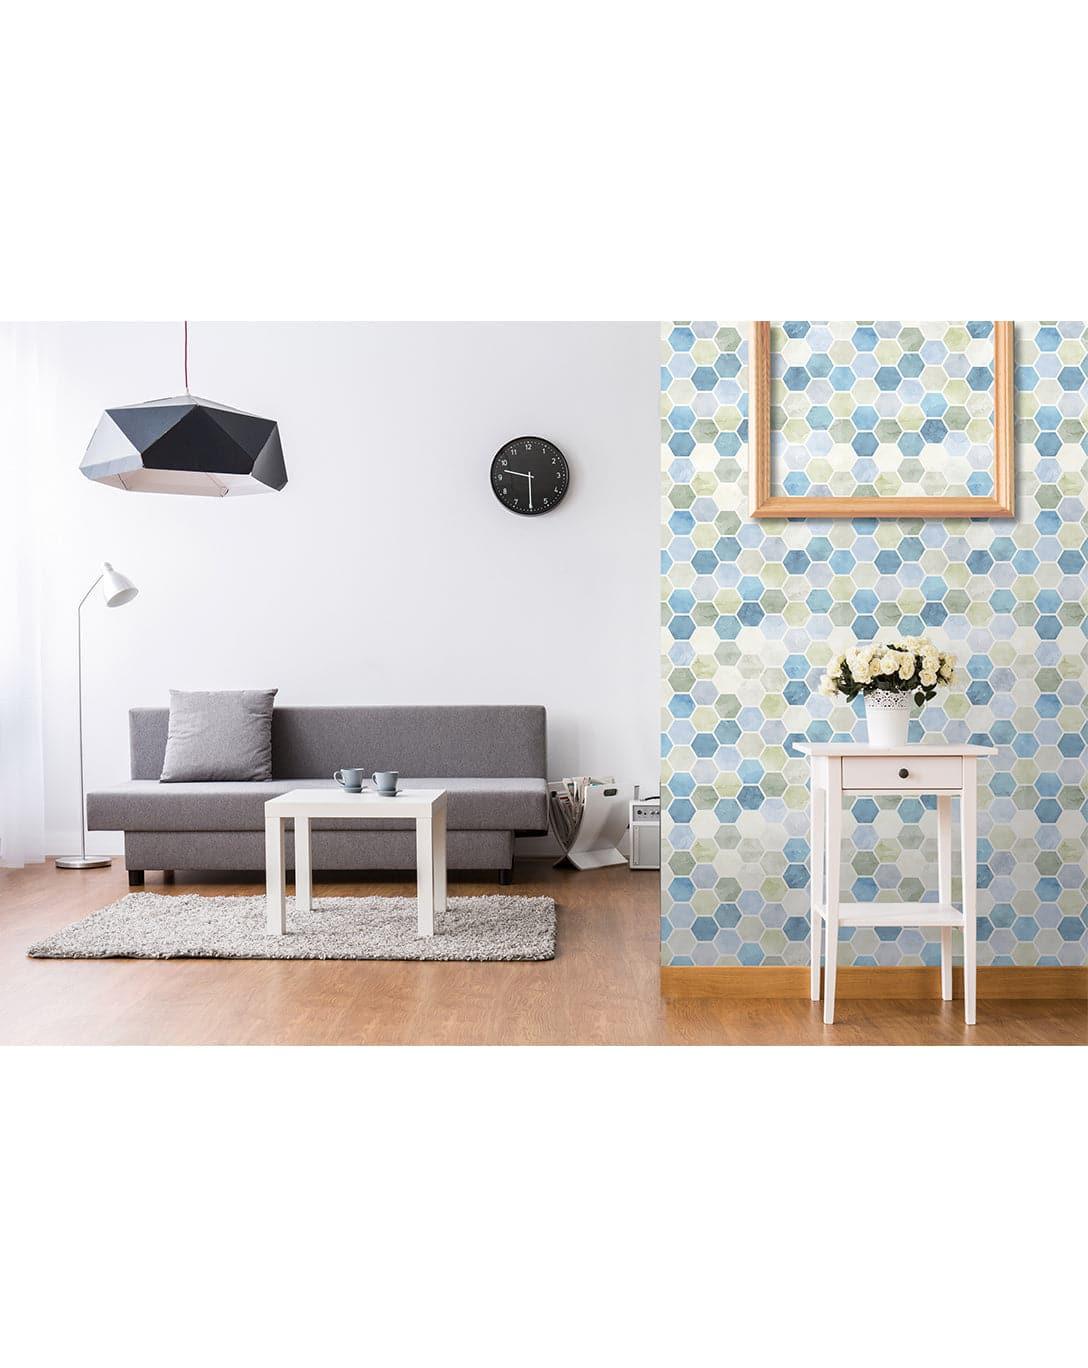 Watercolor Hexagon Honeycomb Removable Wallpaper Watercolor Hexagon Honeycomb Removable Wallpaper 